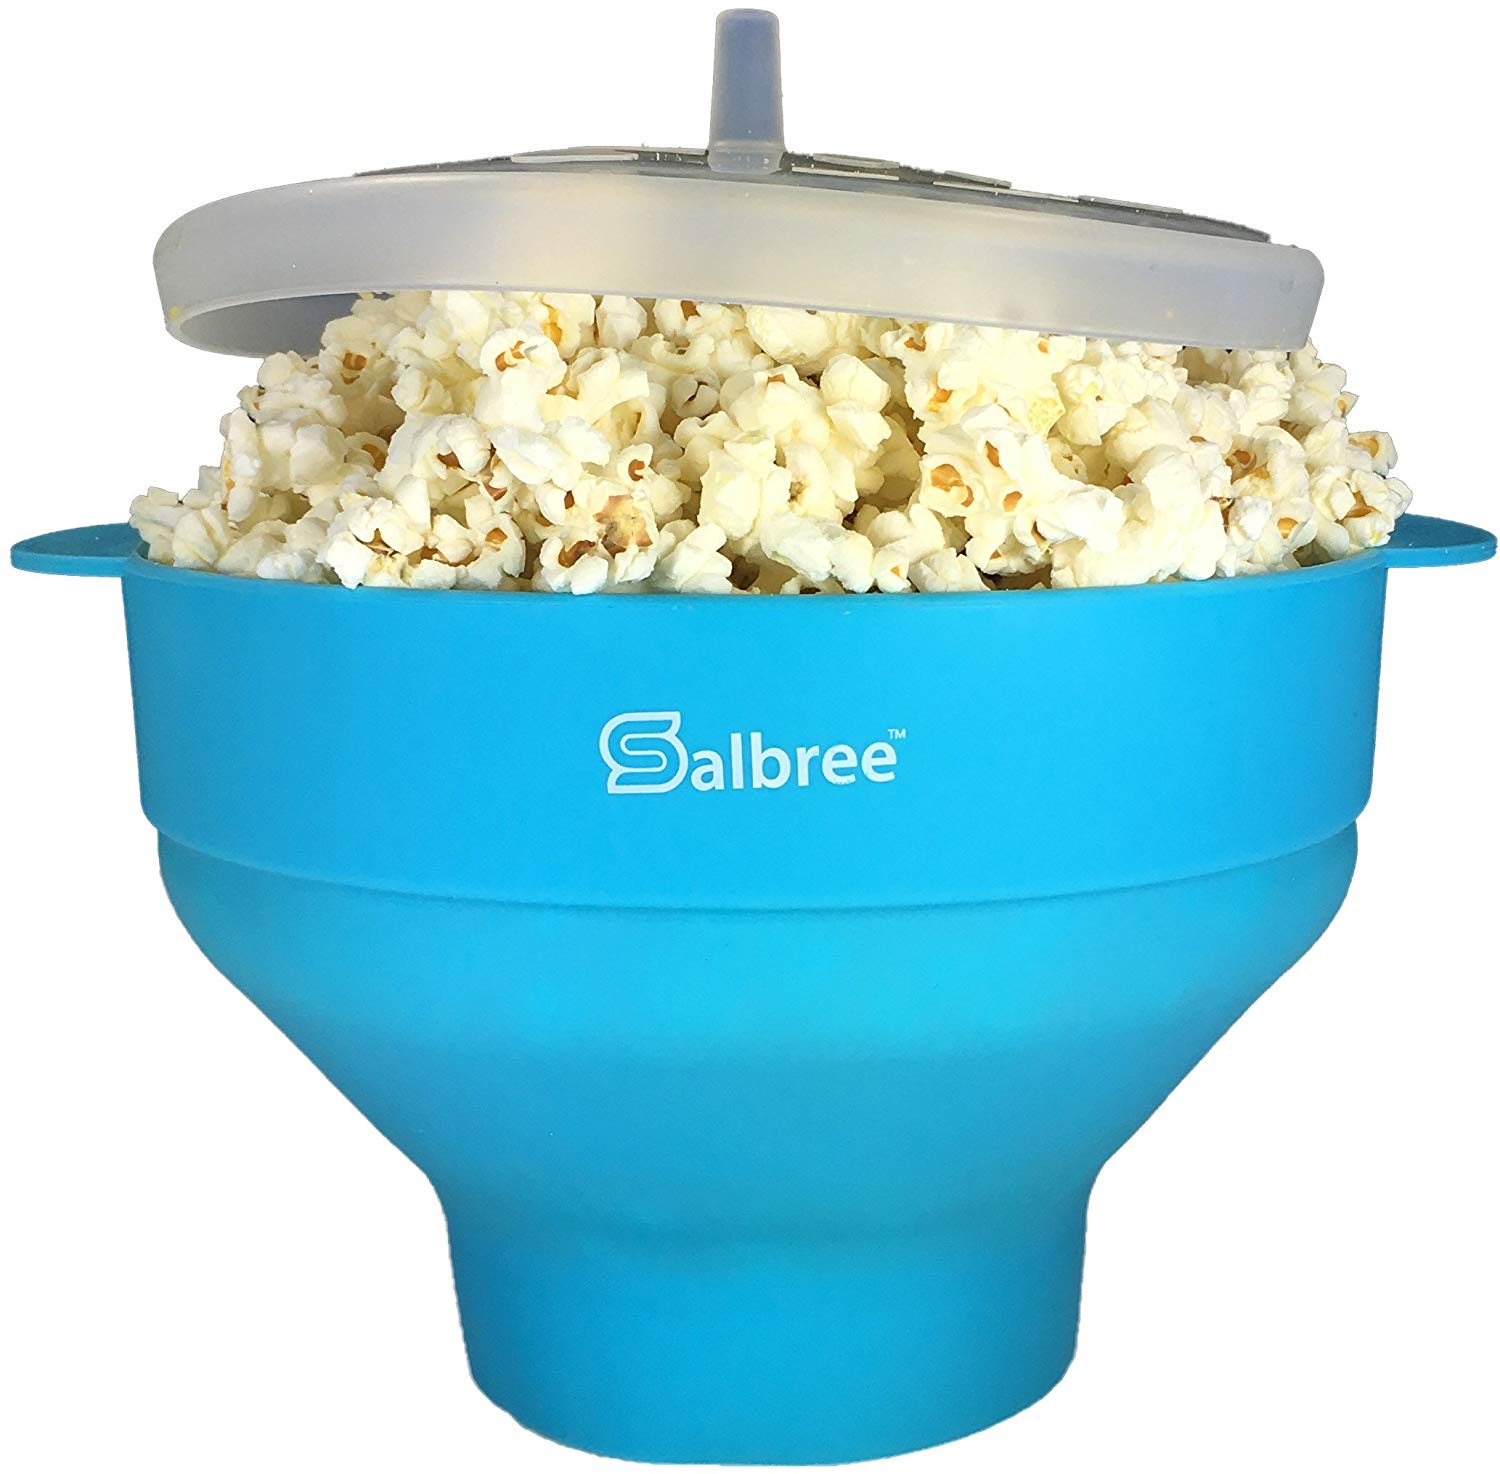 Popcorn Maker Review 2021- Does it work？ 